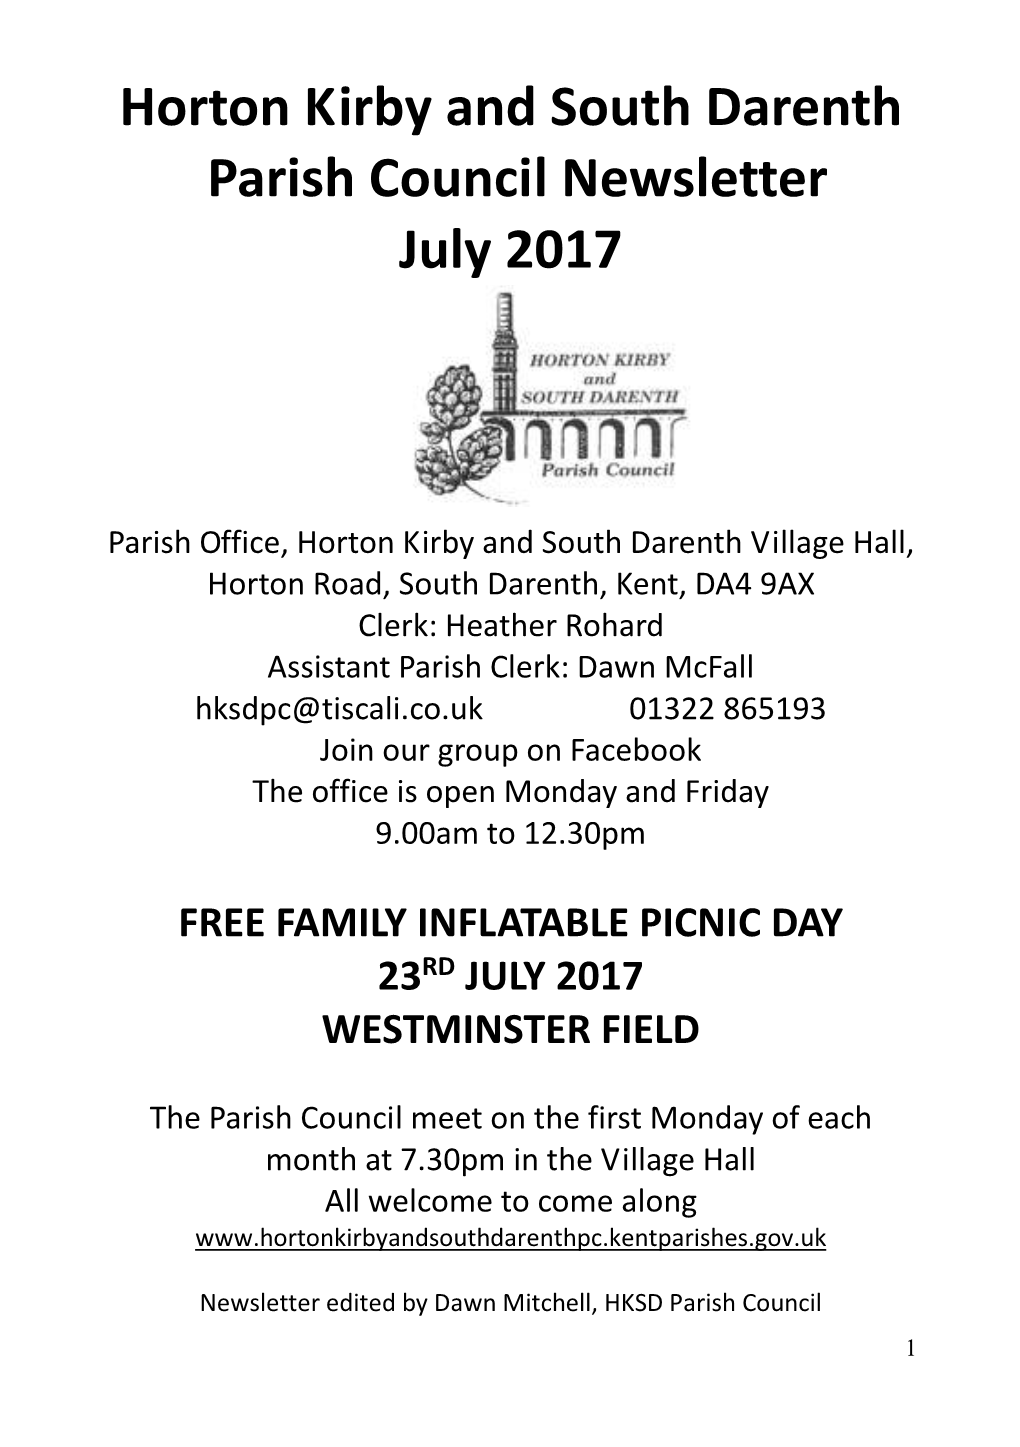 Horton Kirby and South Darenth Parish Council Newsletter July 2017